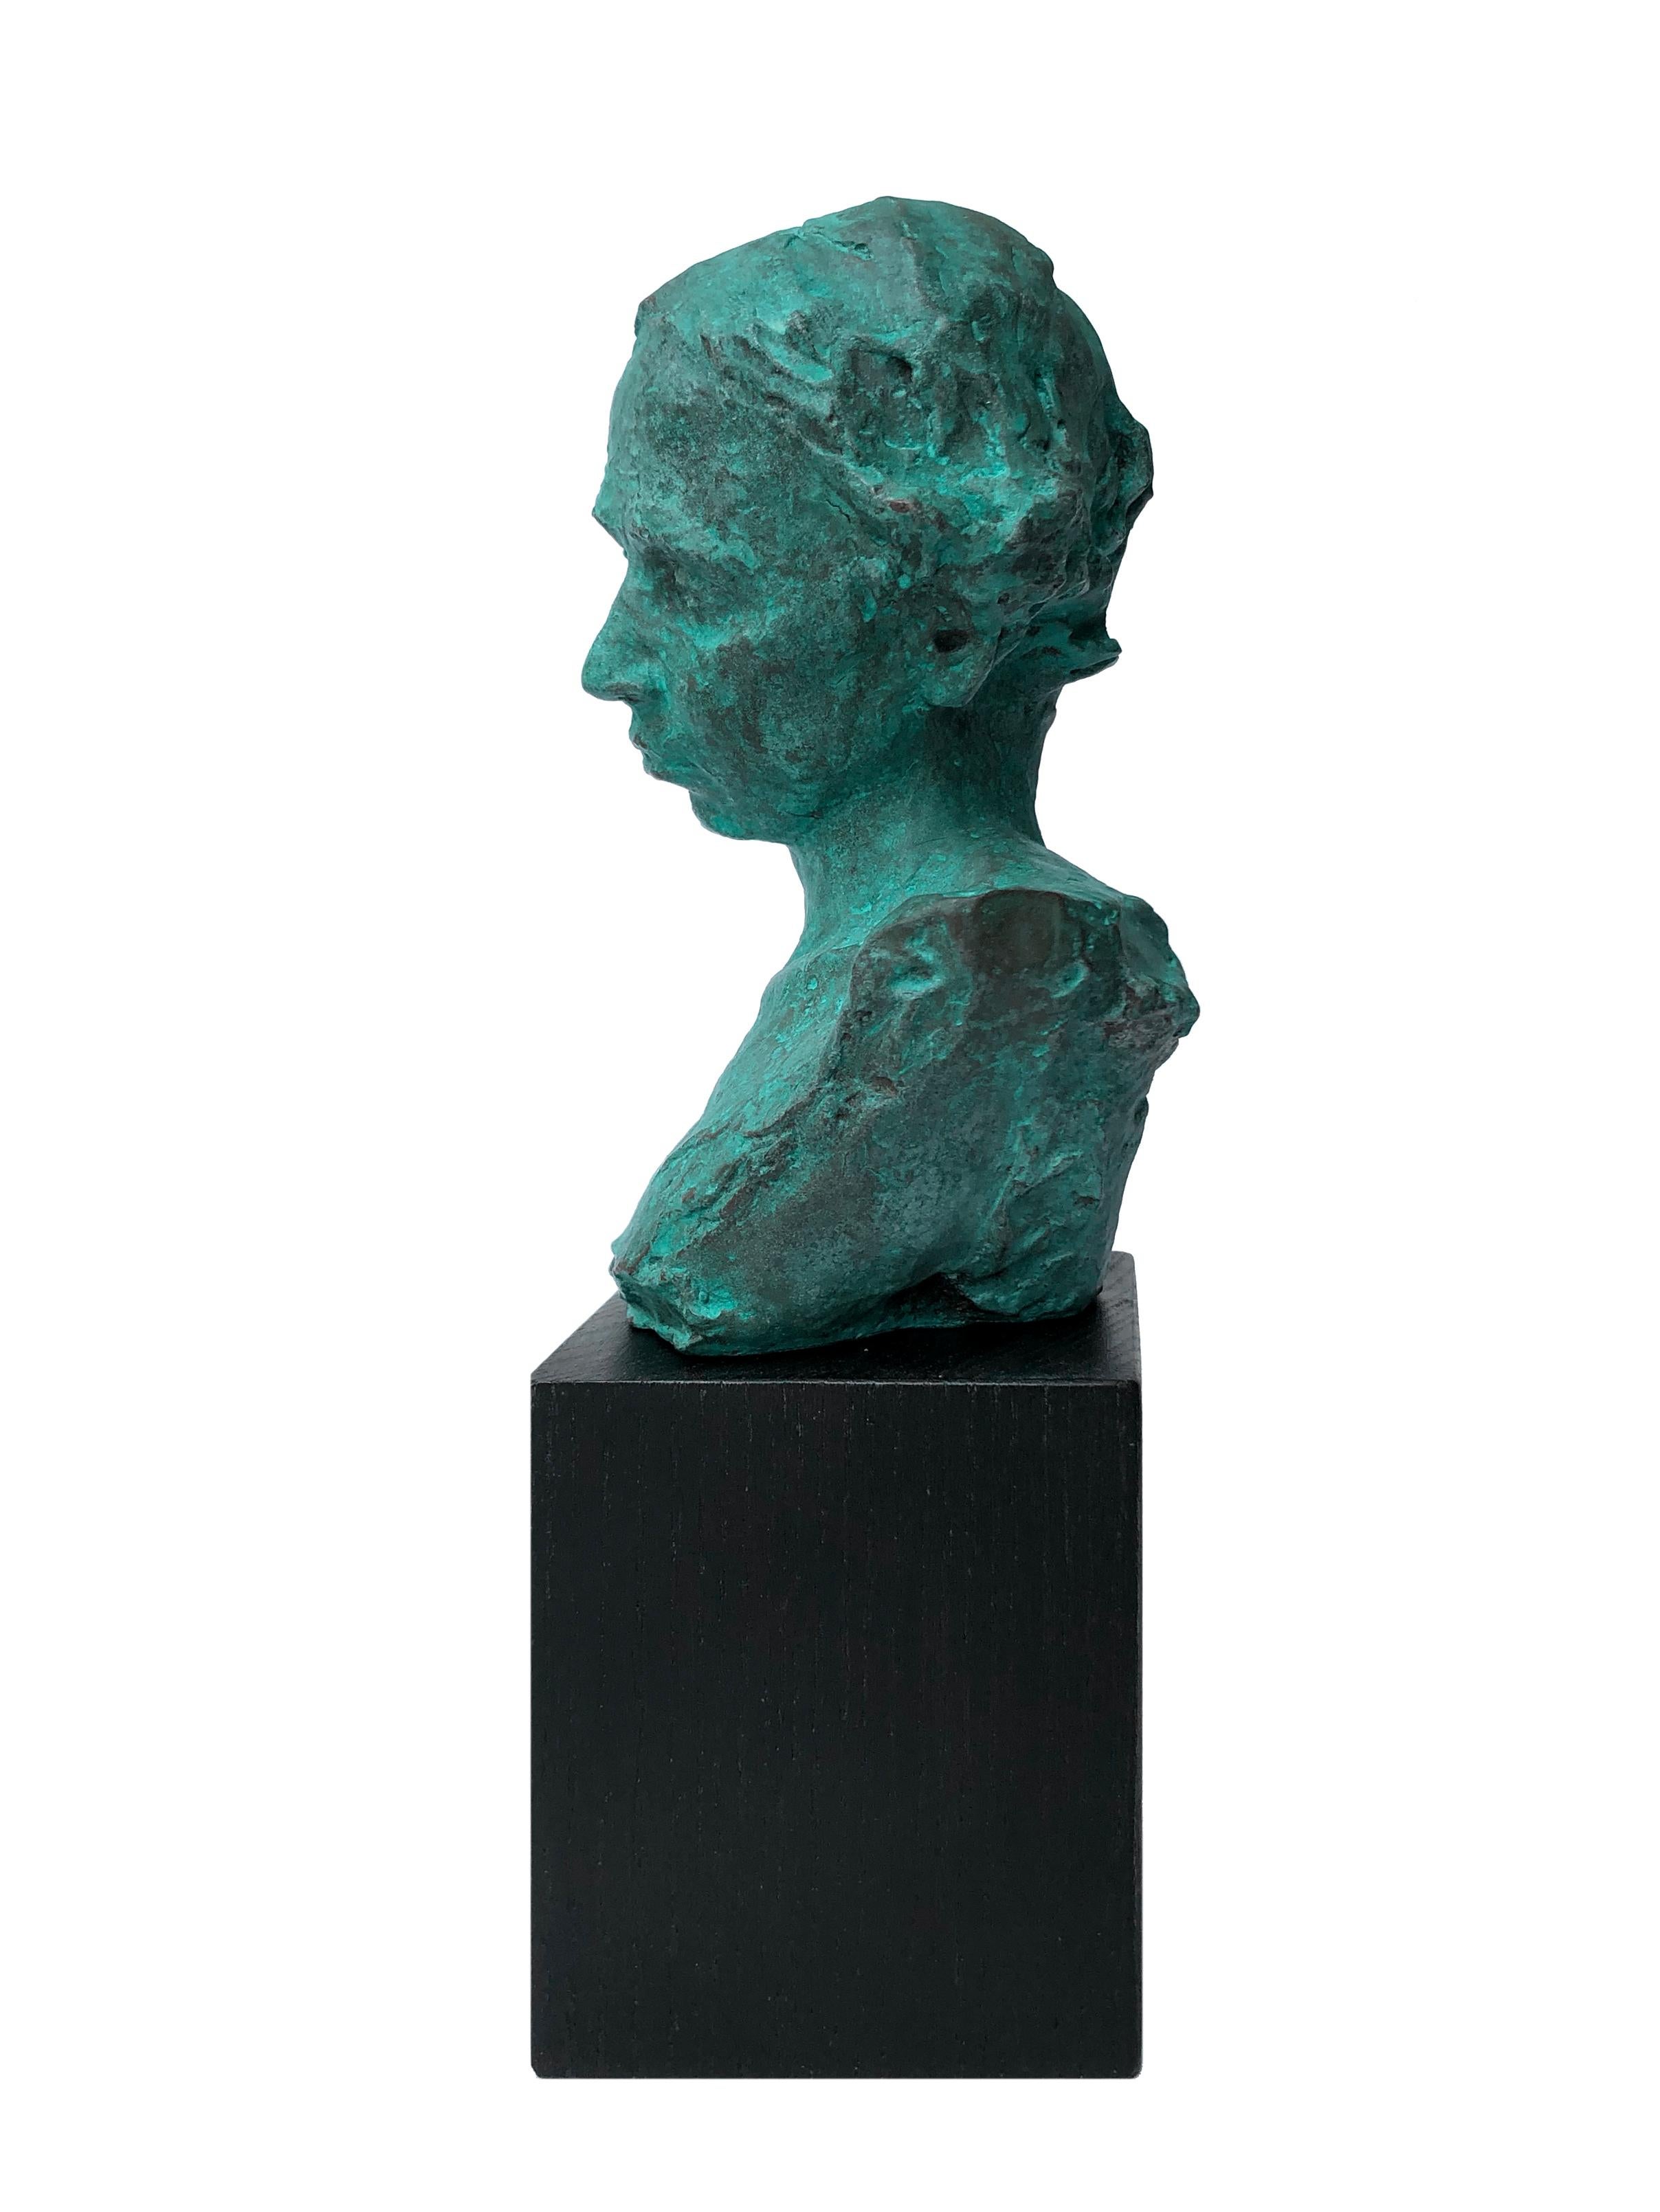 Provenance
Acquired by the gallery directly from the artist

Artist Statement
“This seven-inch portrait bust is the subject of an ongoing project to experiment with surface treatments and presentation. The first casting was an artists' proof which